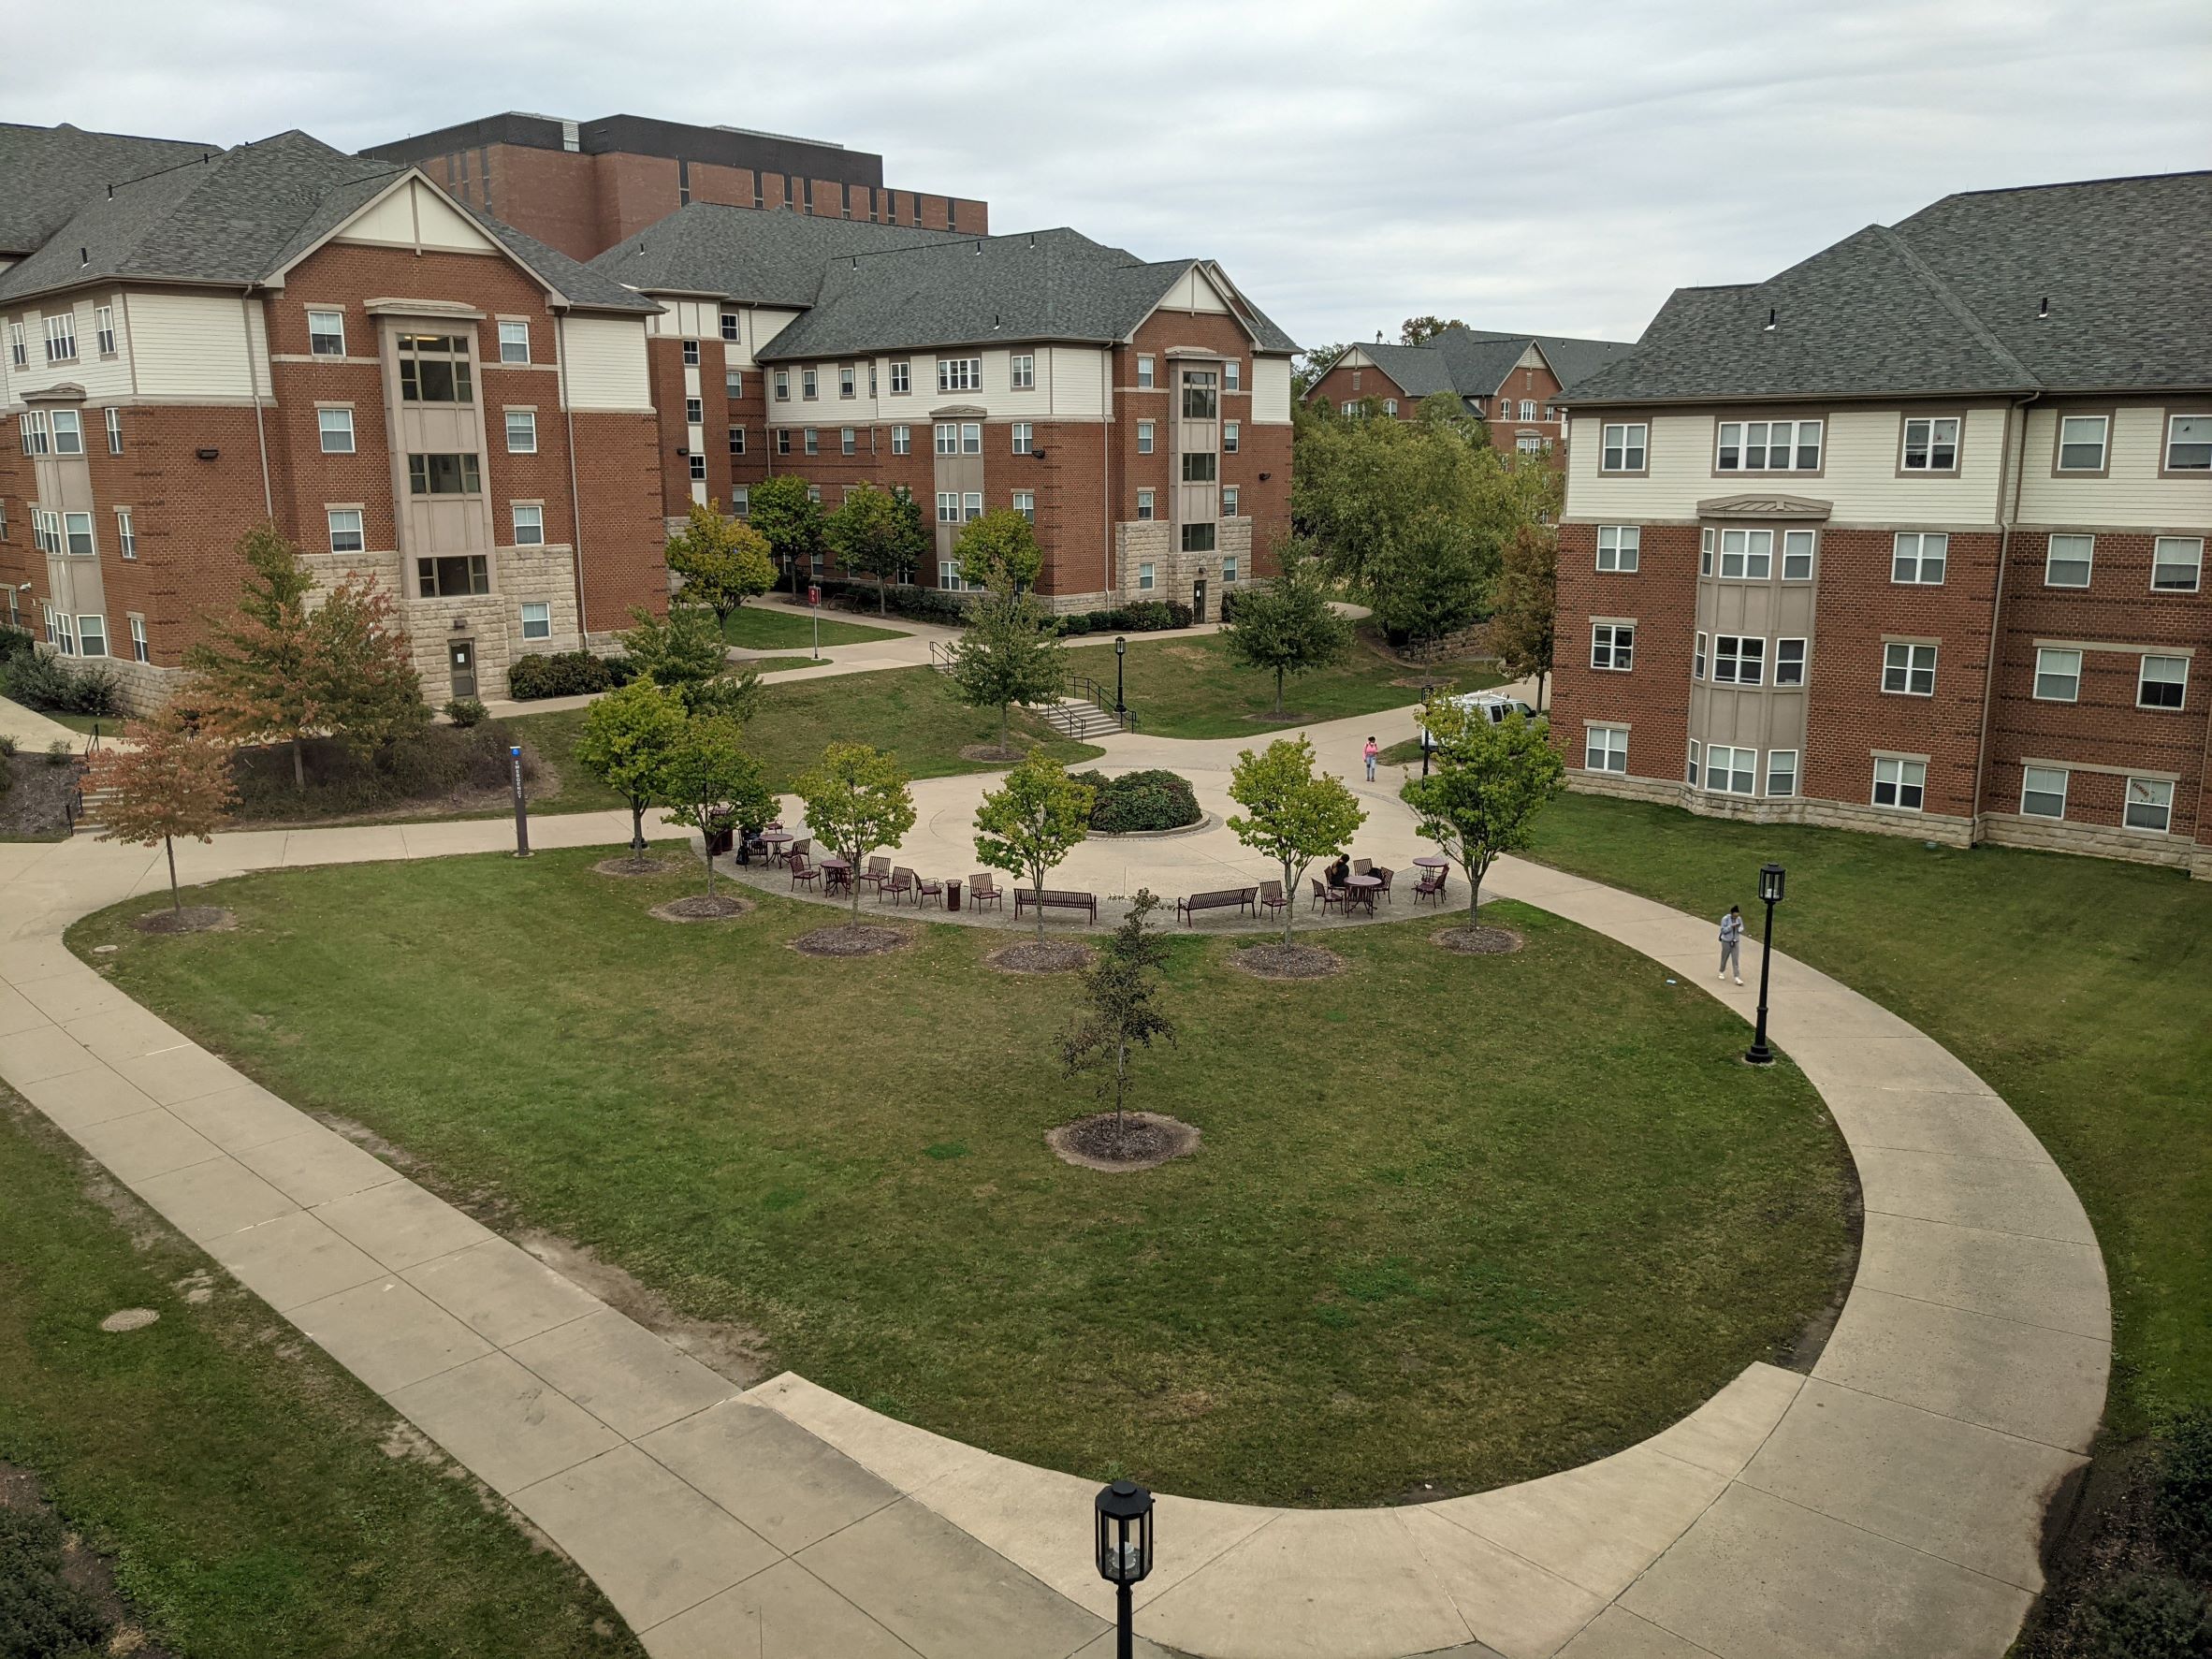 Aerial view of courtyard with swooping sidewalks and central gathering area surrounded by traditional red brick living learning student housing community dormitory buildings